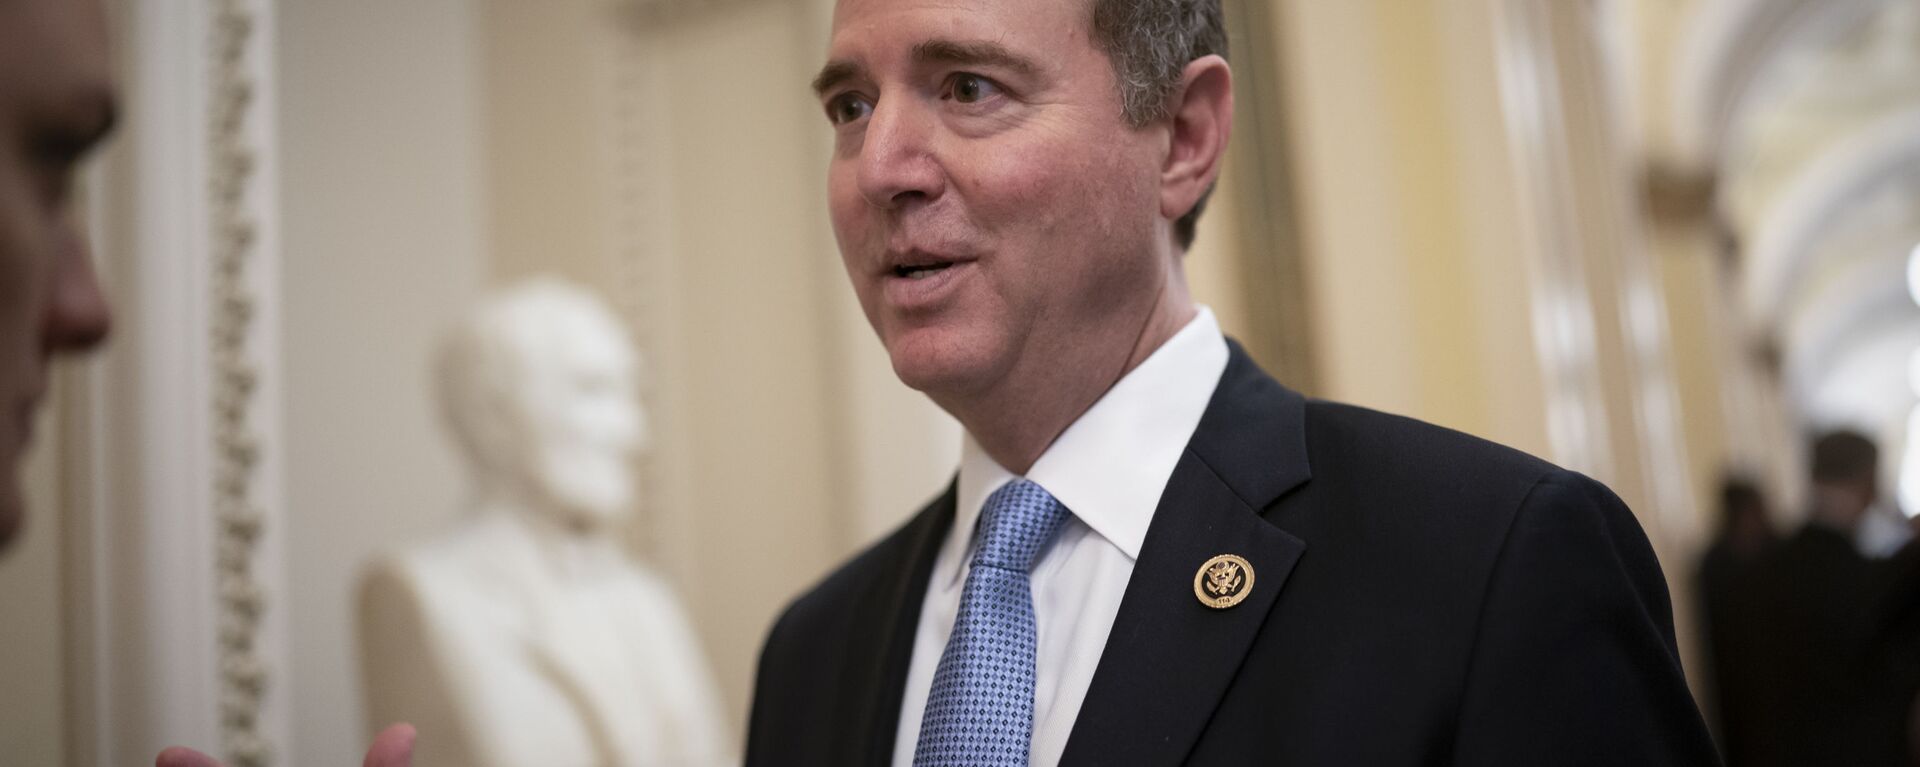 House Intelligence Committee Chairman Adam Schiff, D-Calif., talks to reporters as lawmakers work to extend government surveillance powers that are expiring soon, on Capitol Hill in Washington, Tuesday, March 3, 2020. - Sputnik International, 1920, 14.08.2022